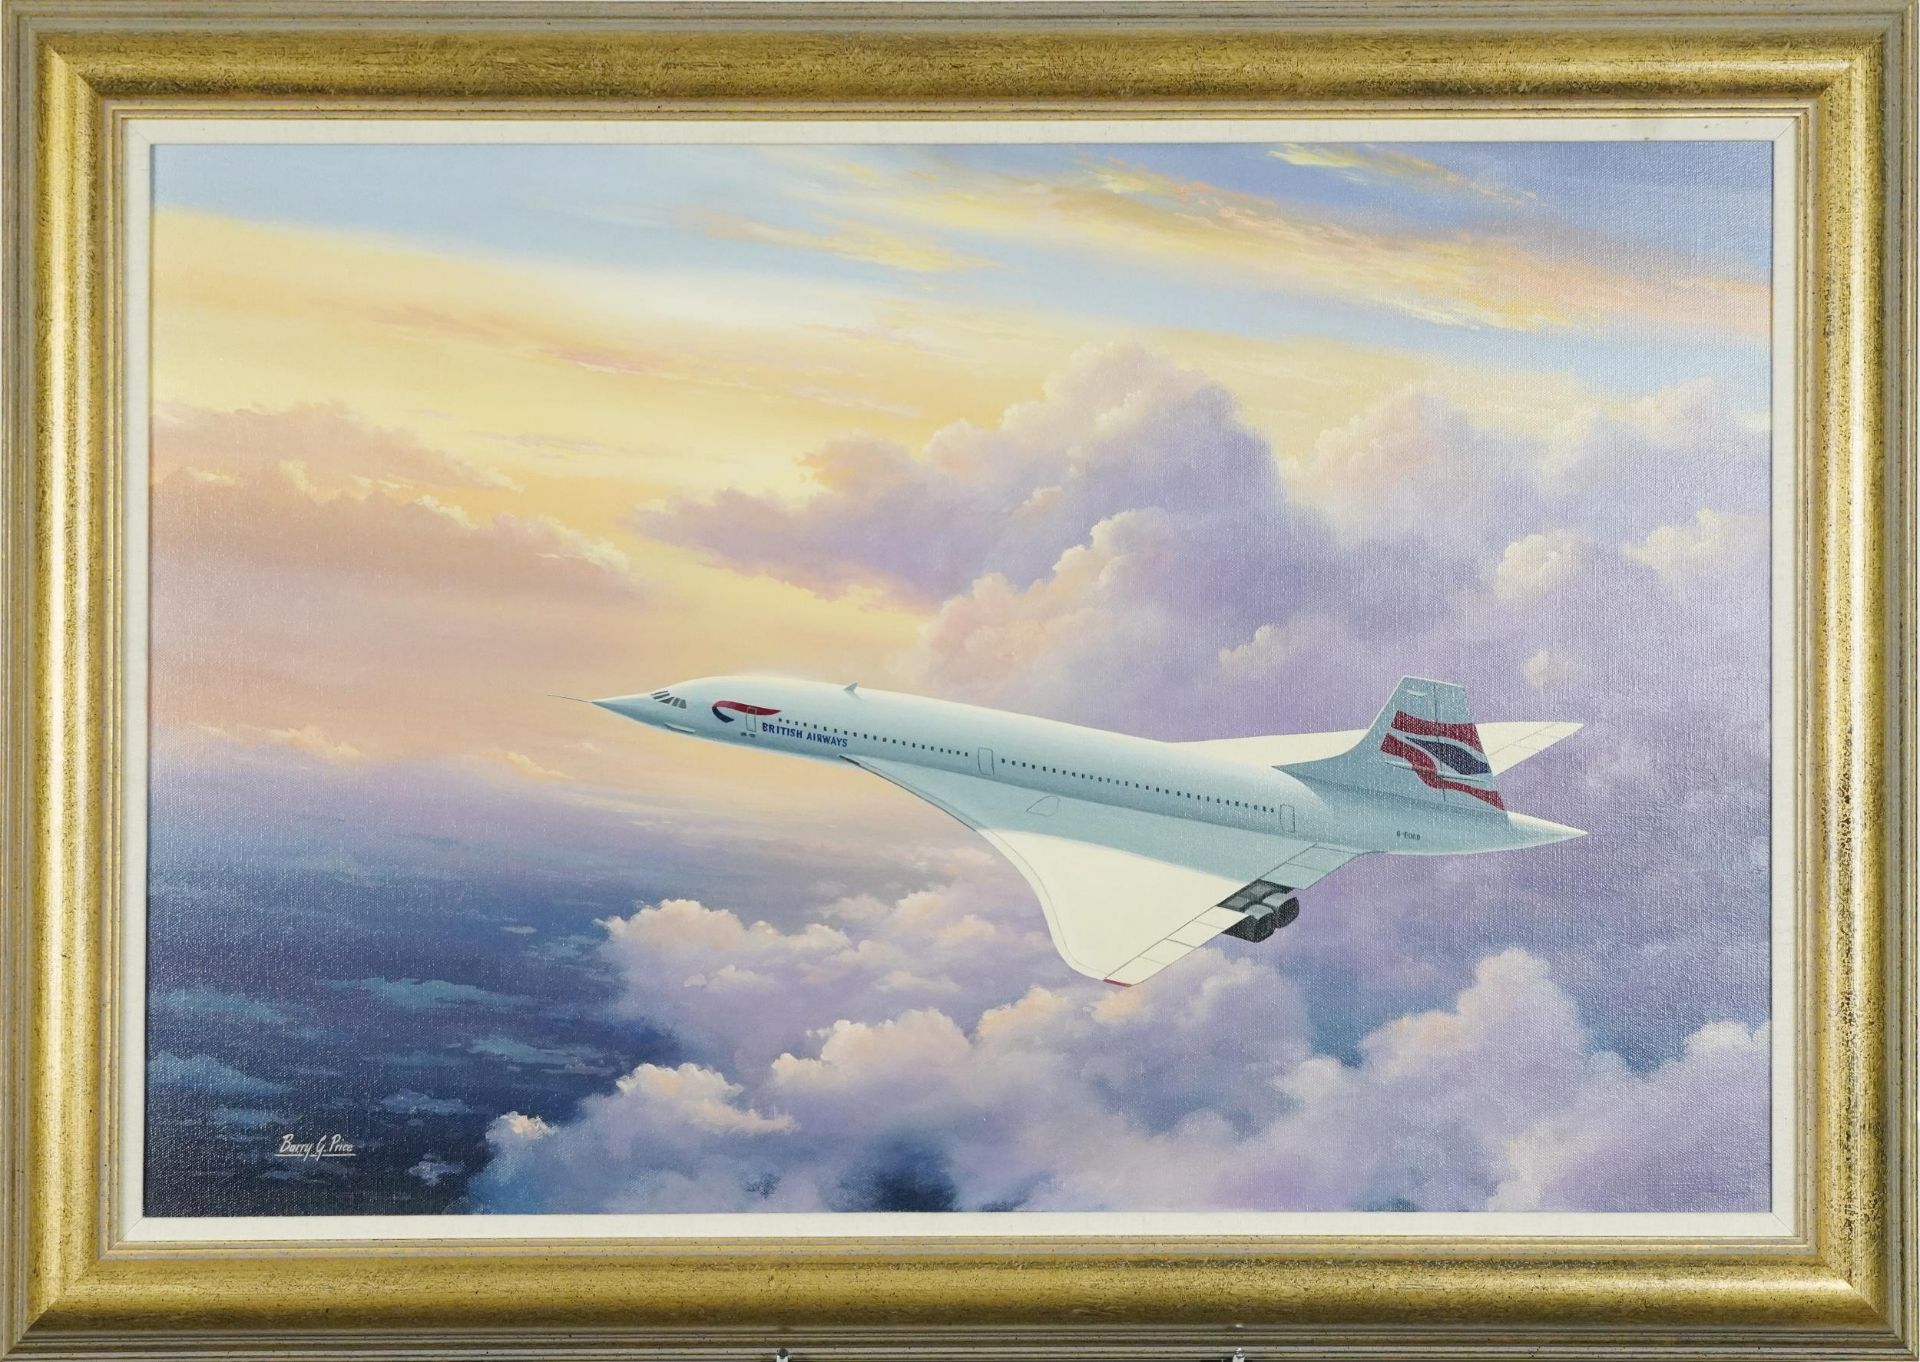 Barry G Price - British Airways Concorde, aviation interest oil on canvas, mounted and framed, - Image 2 of 4